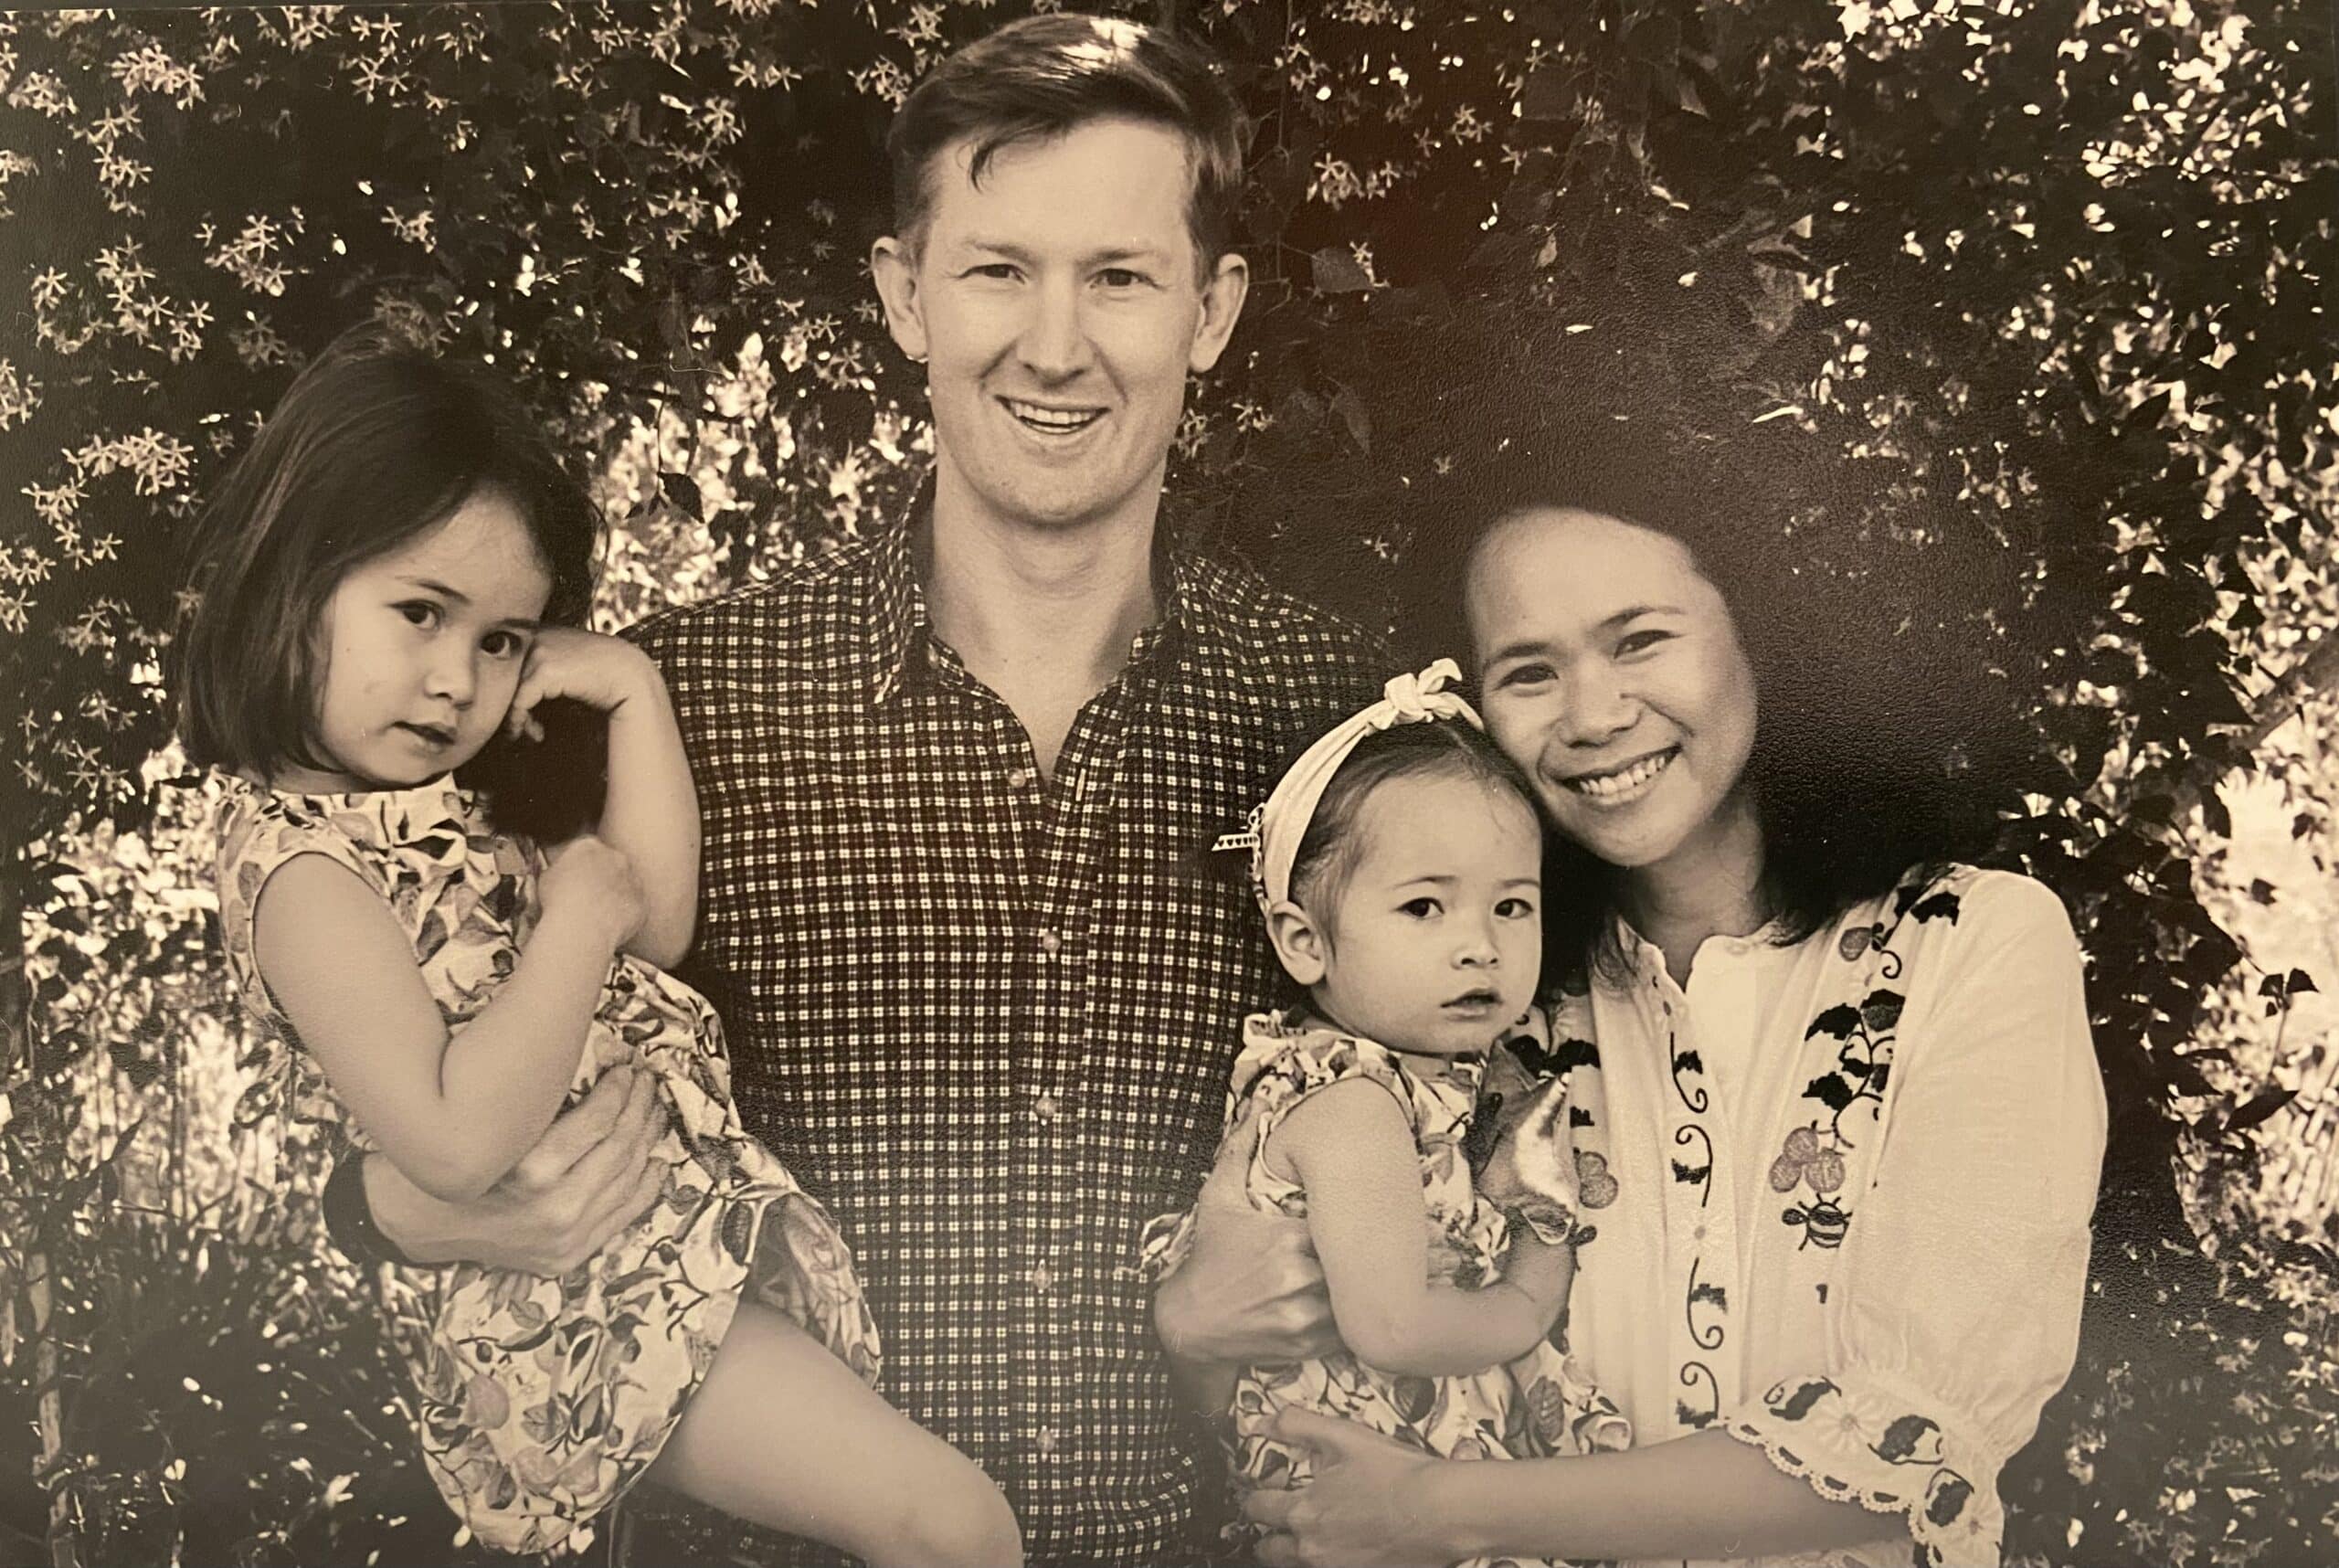 Black and white photo of a man and wife each holding one of their young daughters, smiling to camera